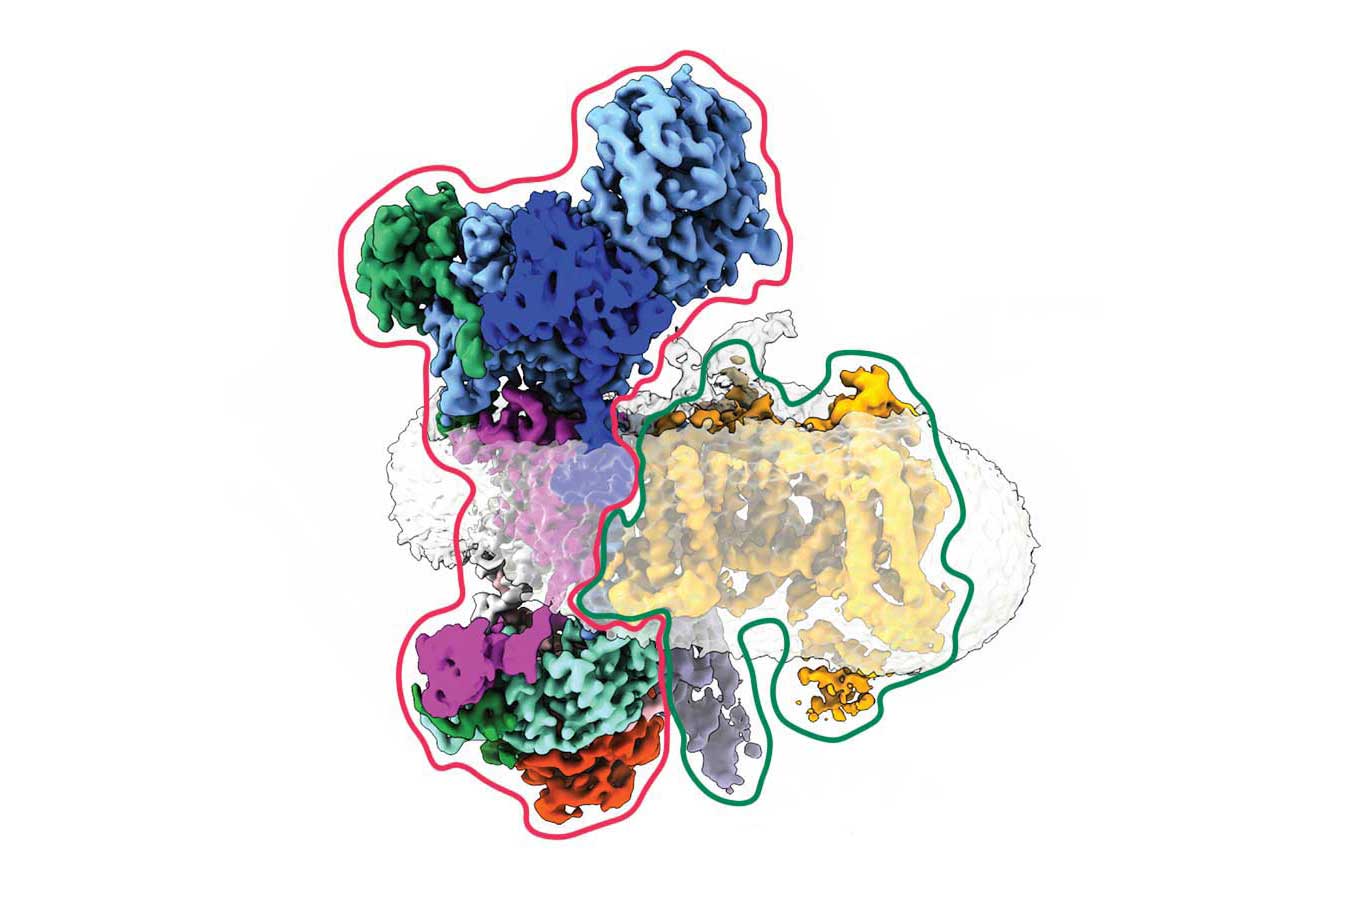 A 3D model of a protein. The left half is outlined in red to signify the EMC enzyme. The right side is outlined in green to indicate parts of a voltage gated calcium channel as it becomes part of the EMC complex.